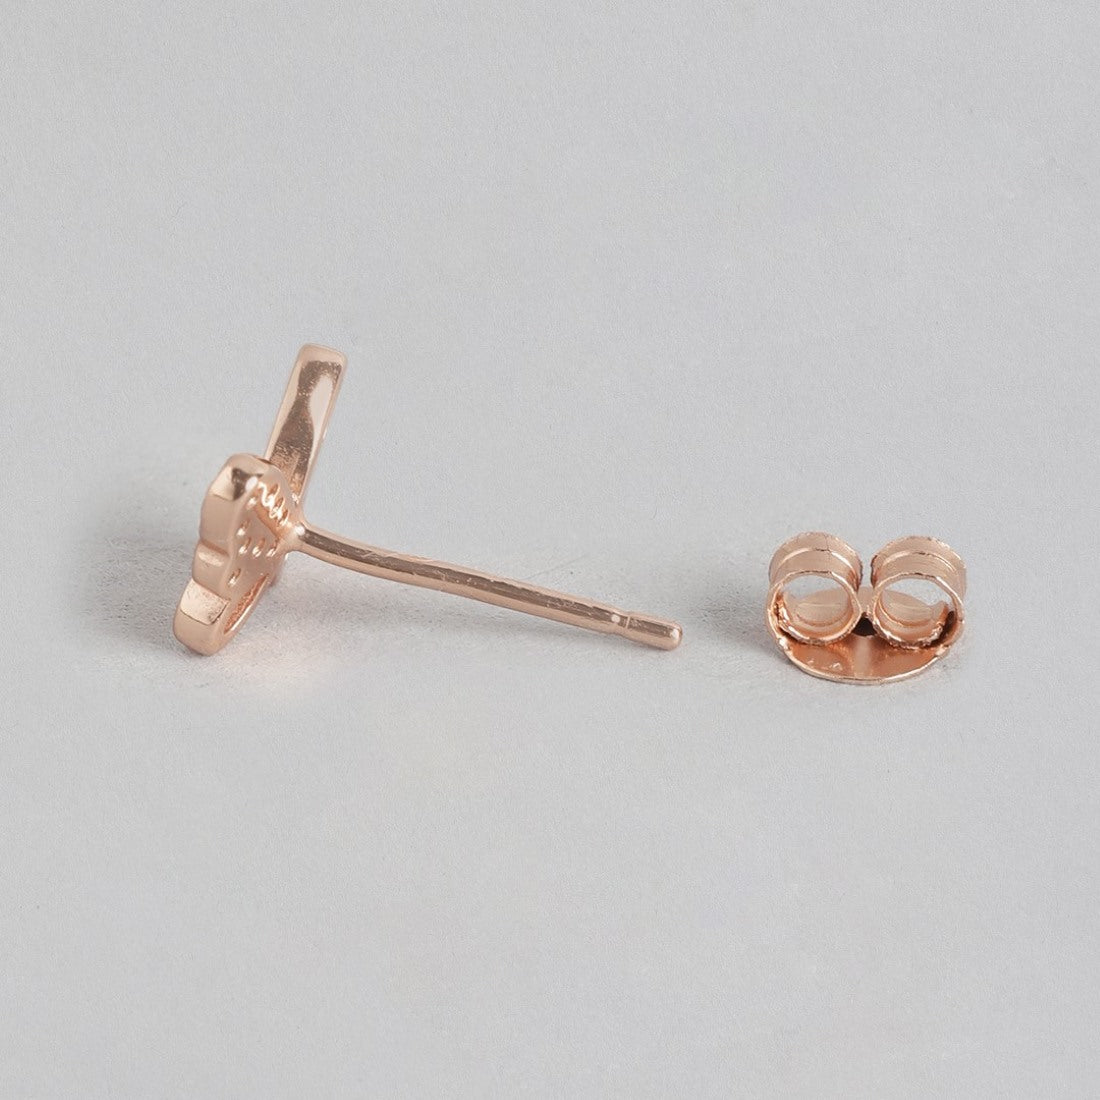 Butterfly Blush Rose Gold-Plated 925 Sterling Silver Earrings